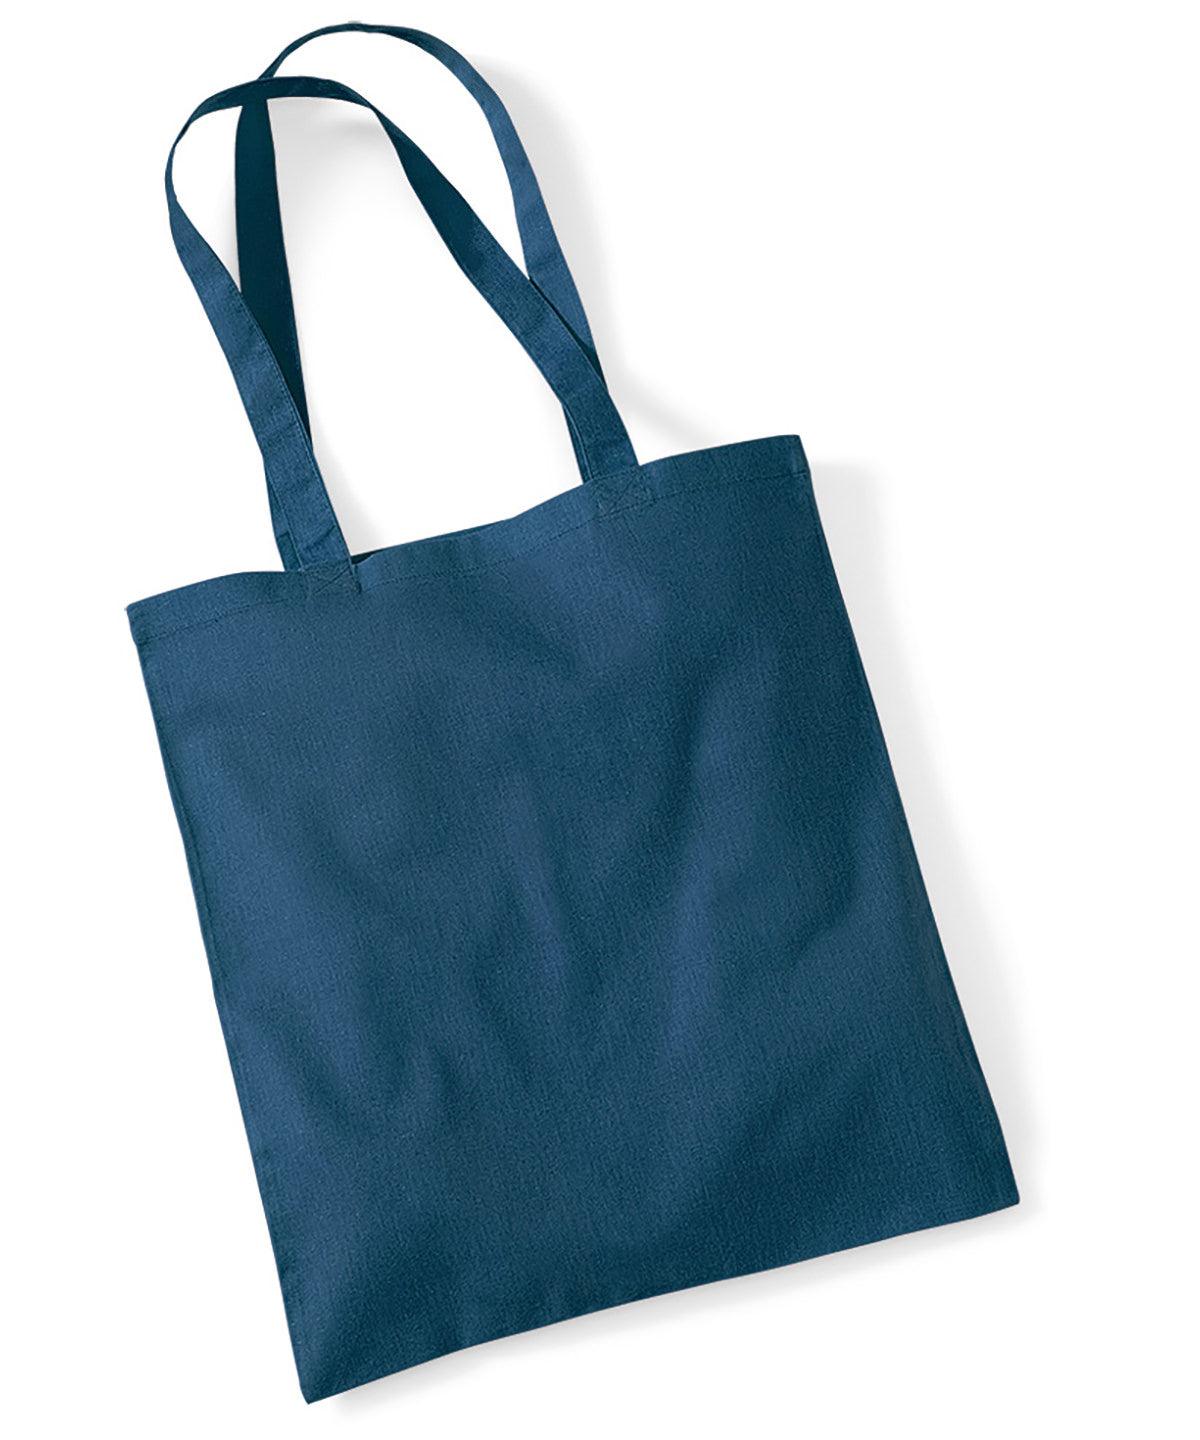 Petrol - Bag for life - long handles Bags Westford Mill Bags & Luggage, Crafting, Must Haves, Rebrandable Schoolwear Centres